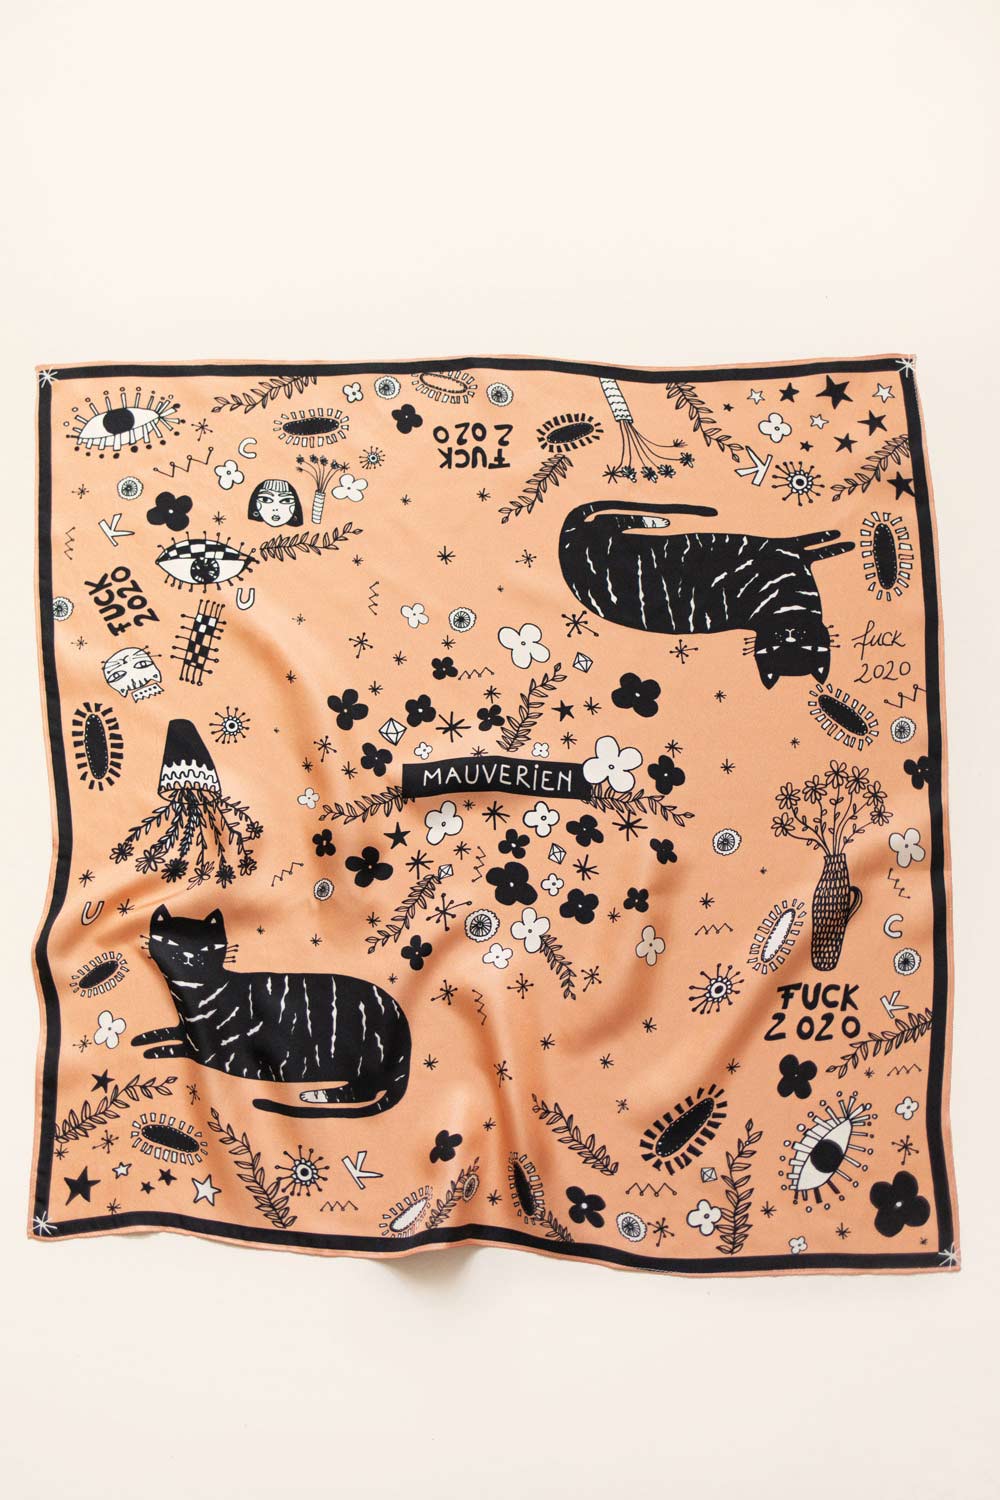 Twill silk scarf with black cats and flowers on pastel orange background.